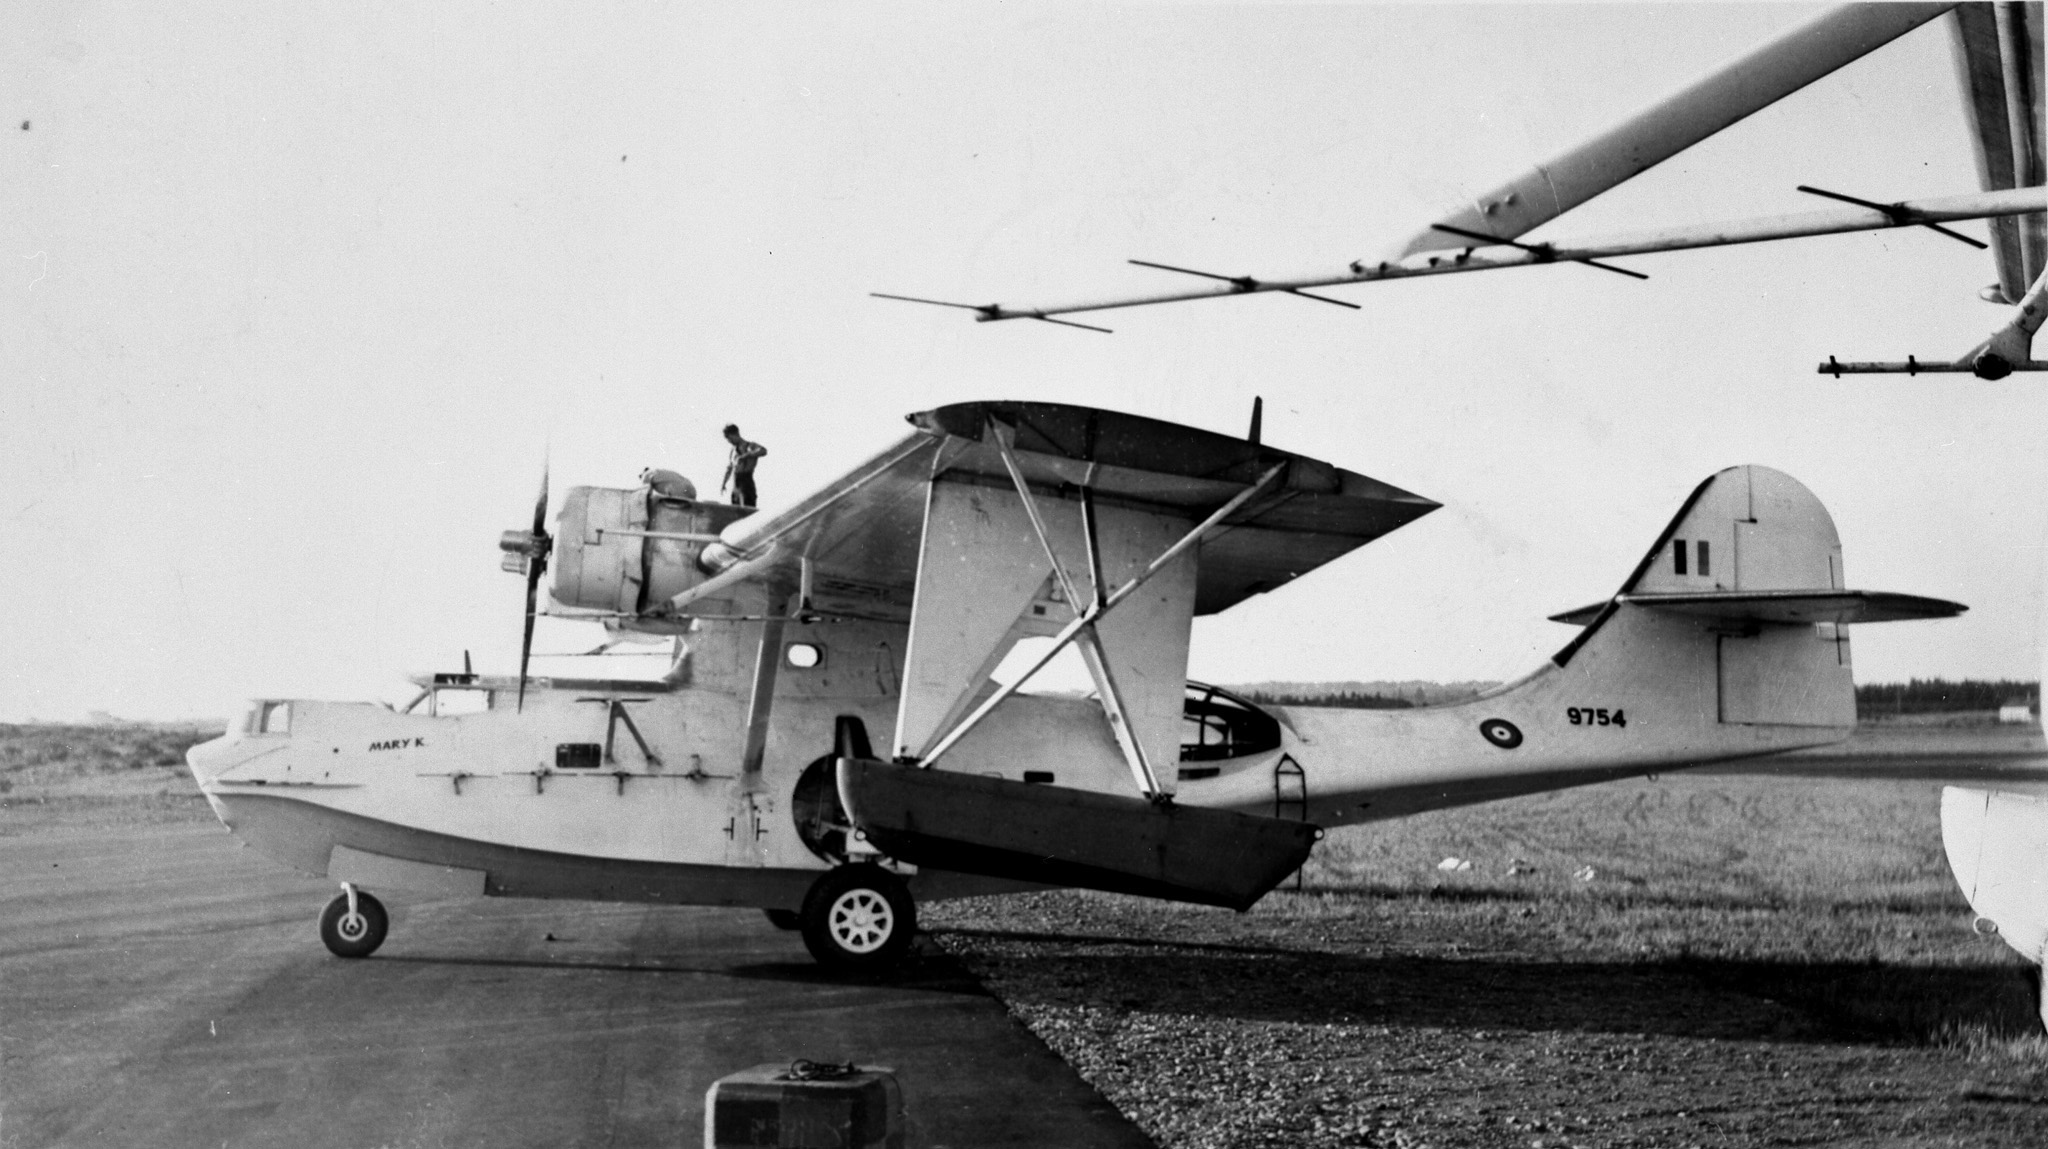 A Consolidated Canso "A" aircraft of 162 Squadron, RCAF, photographed at Yarmouth, Nova Scotia in 1943. This is the aircraft that Flight Lieutenant David Hornell was flying during the 1944 U-Boat attack and subsequent crash that led to his being awarded the Victoria Cross. PHOTO: DND Archives, PMR77-147